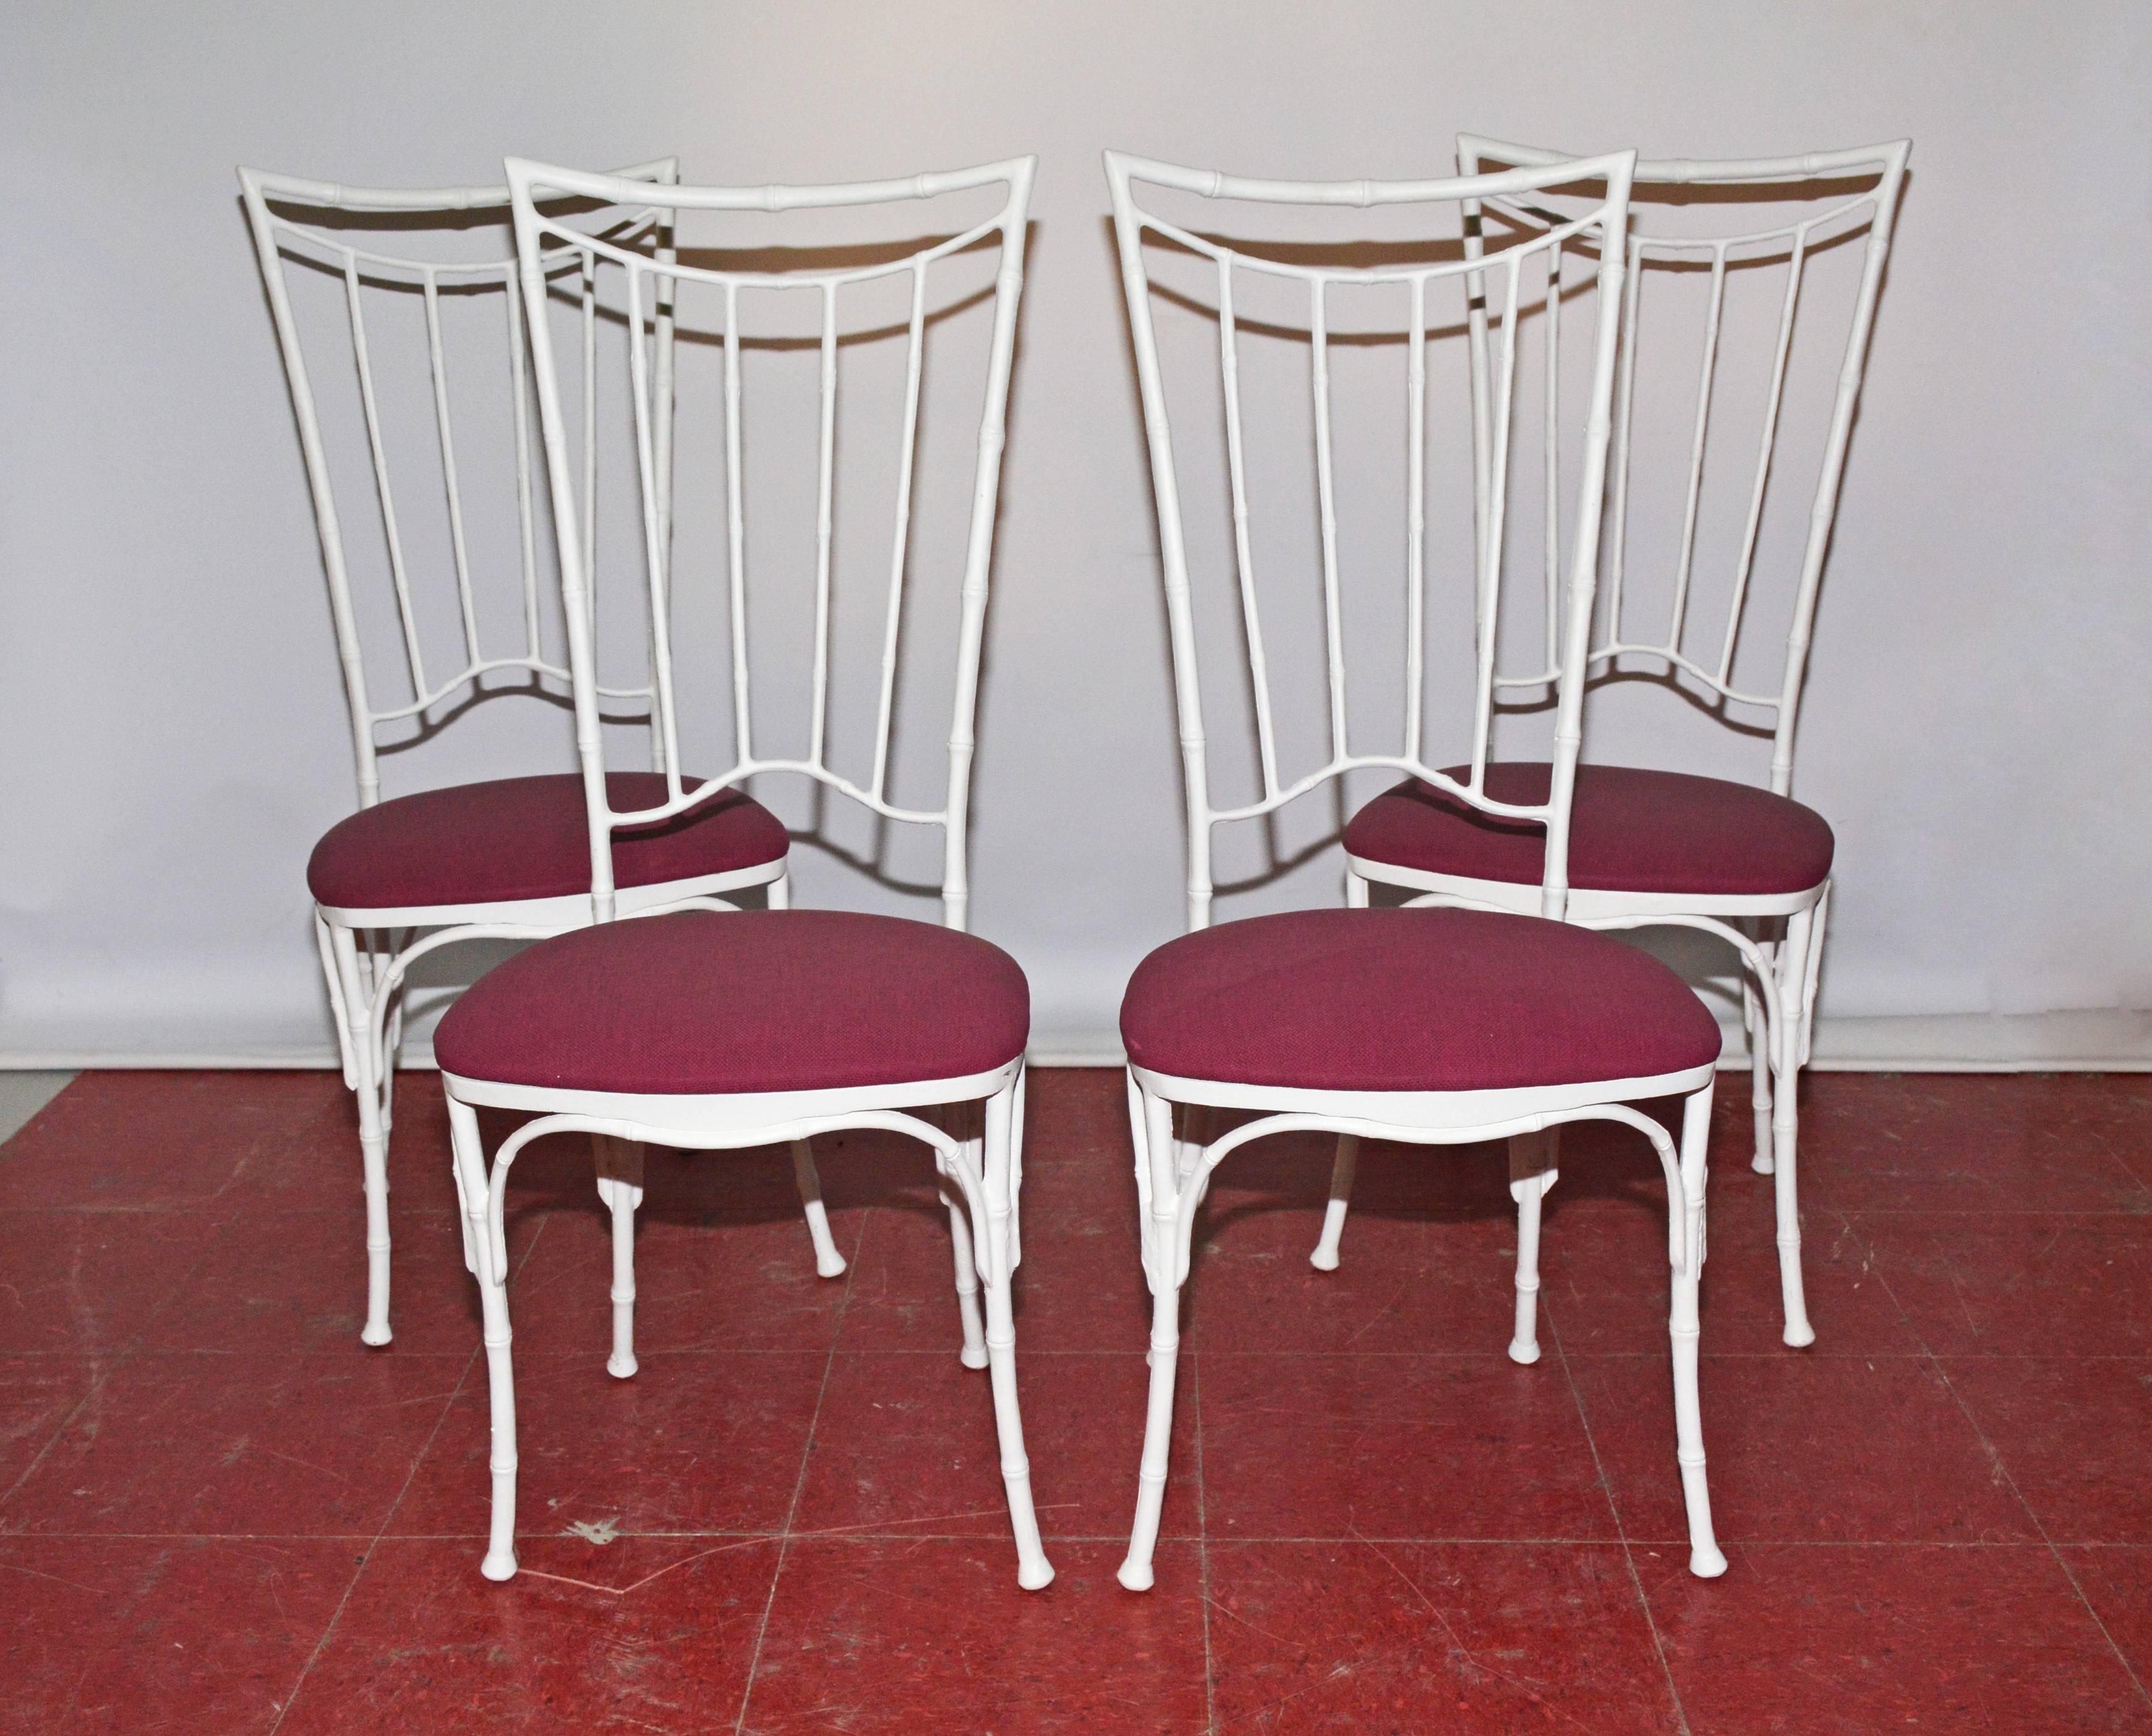 The faux bamboo dining chairs are made of wrought iron painted white and have seats upholstered in purple outdoor fabric. Seats can be easily recovered with a fabric of your choice.